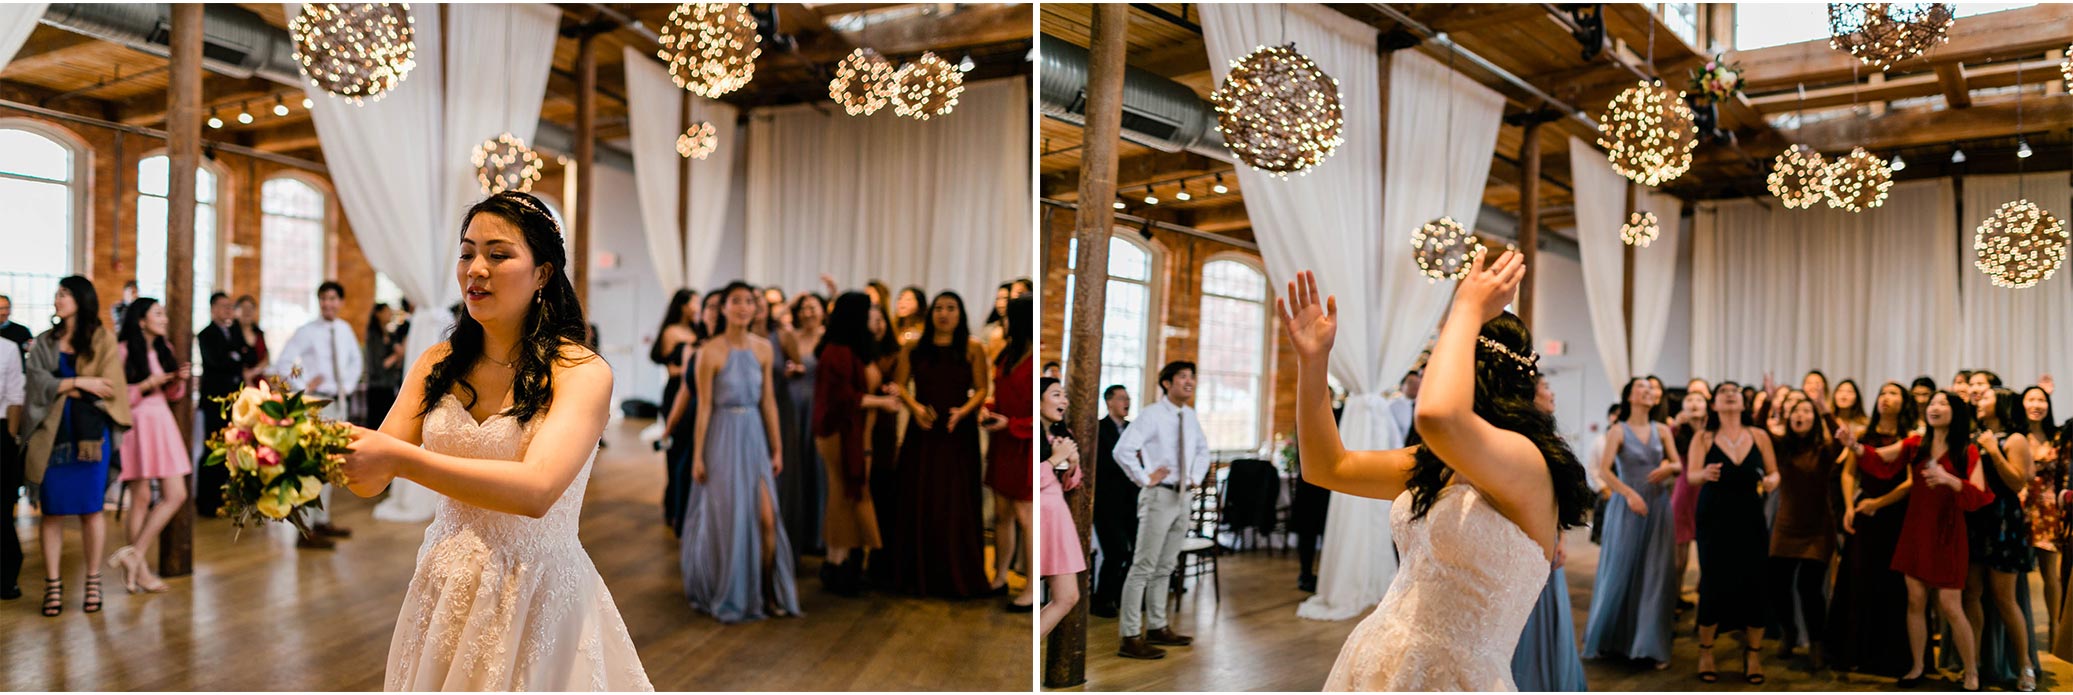 Bouquet toss at The Cotton Room | Durham Event Photographer  | By G. Lin Photography